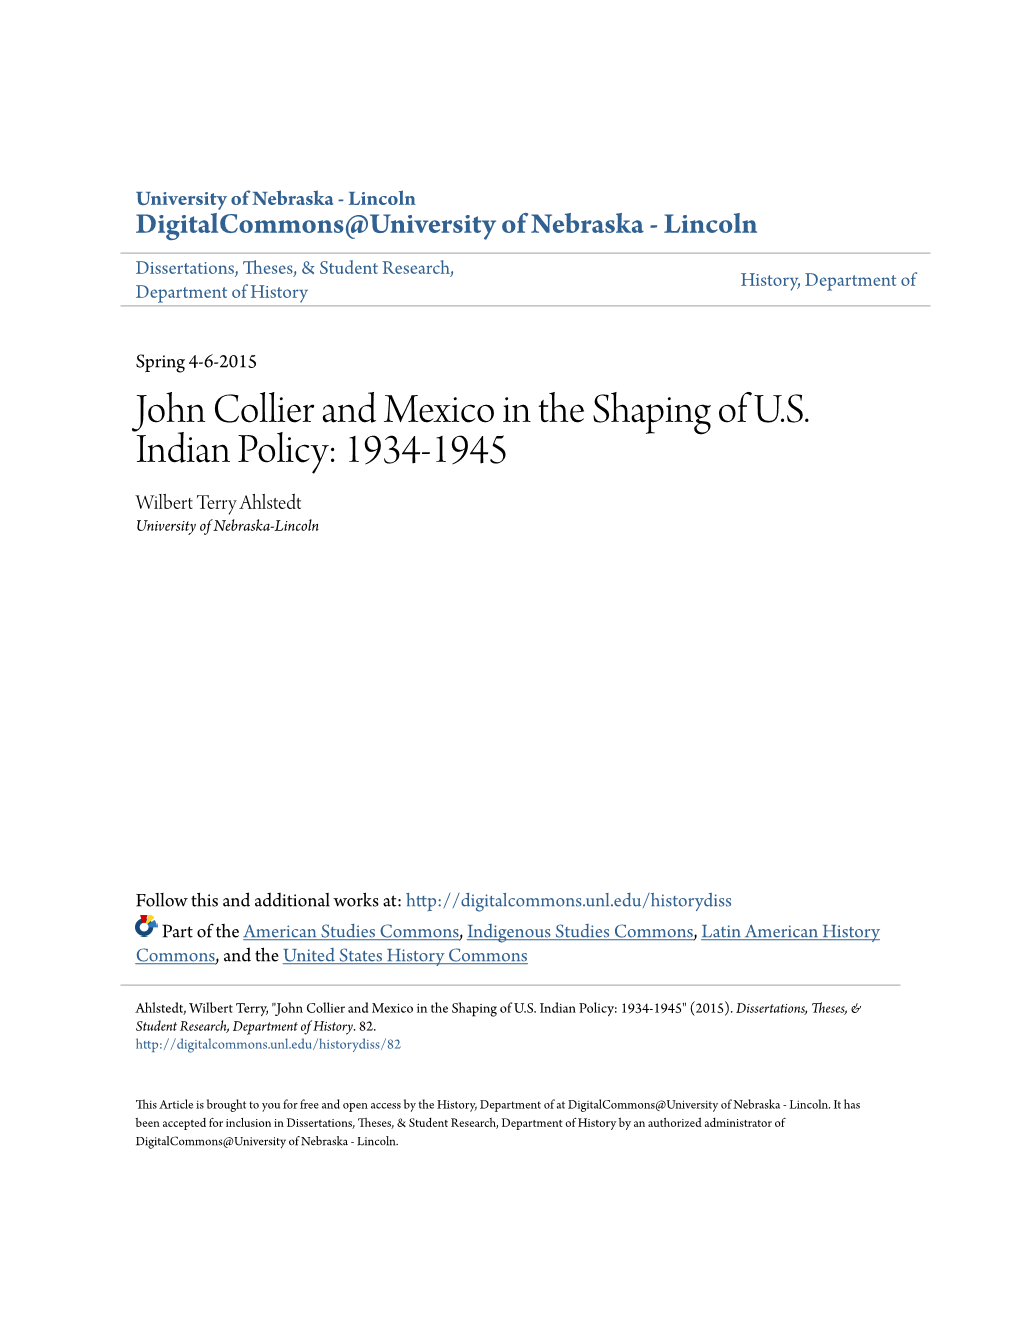 John Collier and Mexico in the Shaping of U.S. Indian Policy: 1934-1945 Wilbert Terry Ahlstedt University of Nebraska-Lincoln